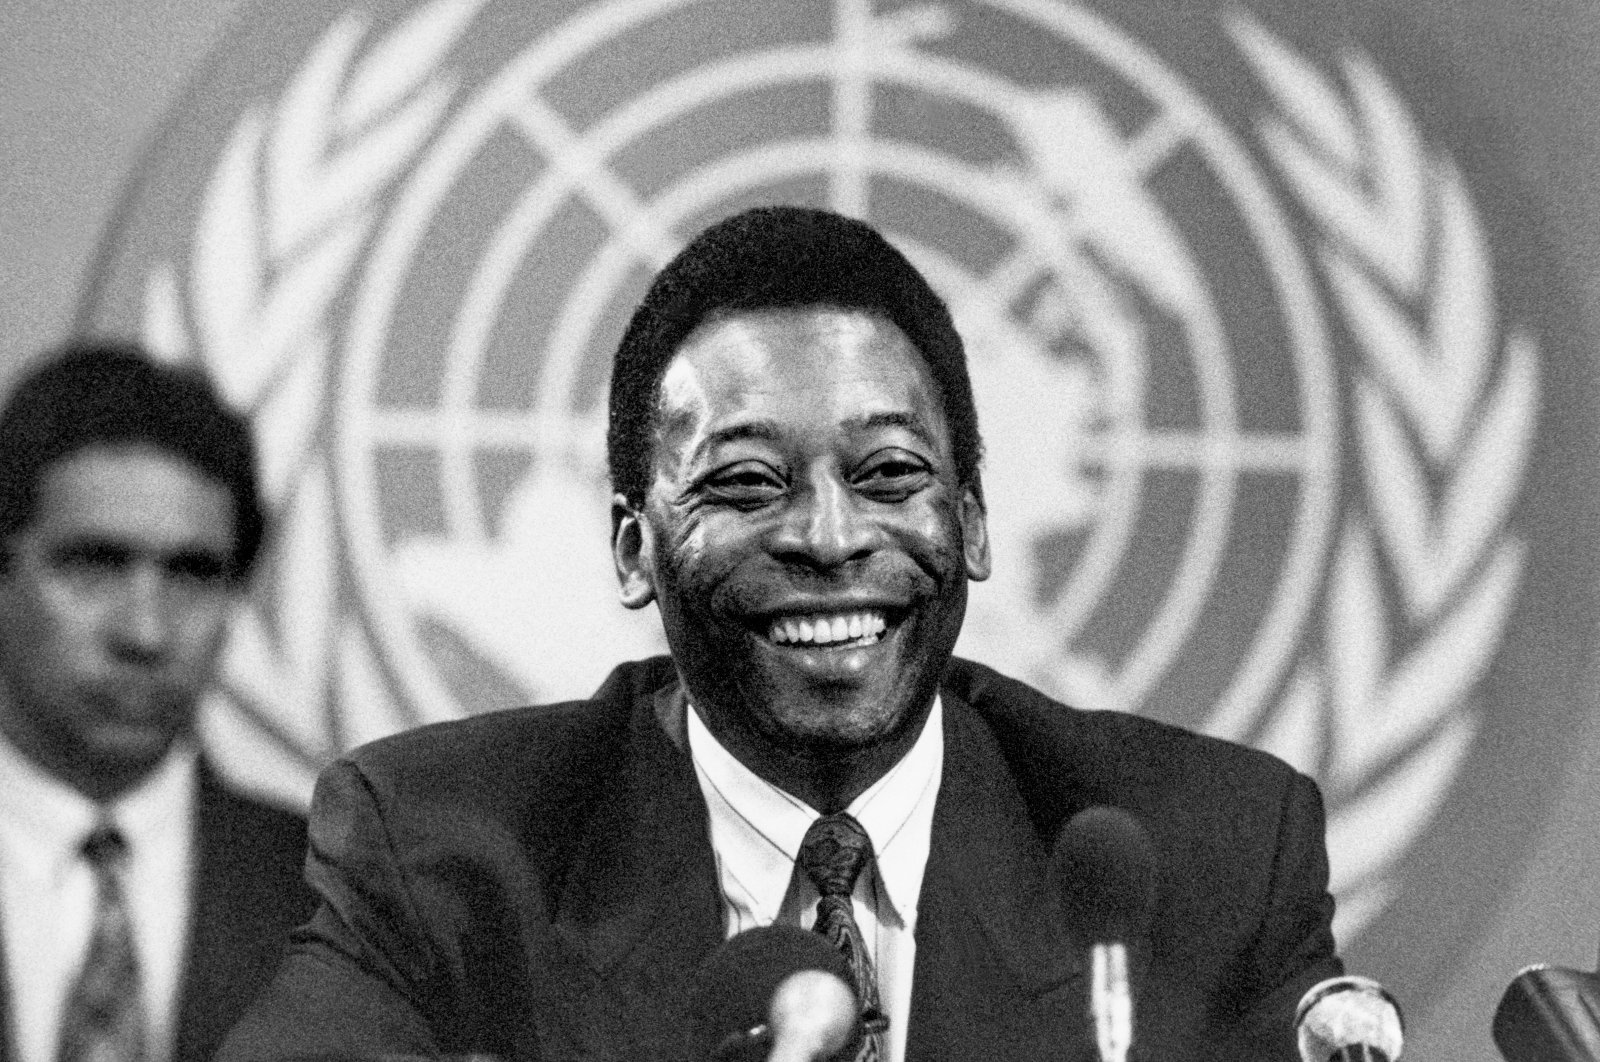 Brazilian soccer legend Pele speaking at the United Nations on Environment and Development&#039;&#039; or UNCED press conference at the Palais des Nations, Geneva, Switzerland, Sept. 05 1991 (issued 30 December 2022). (EPA Photo)